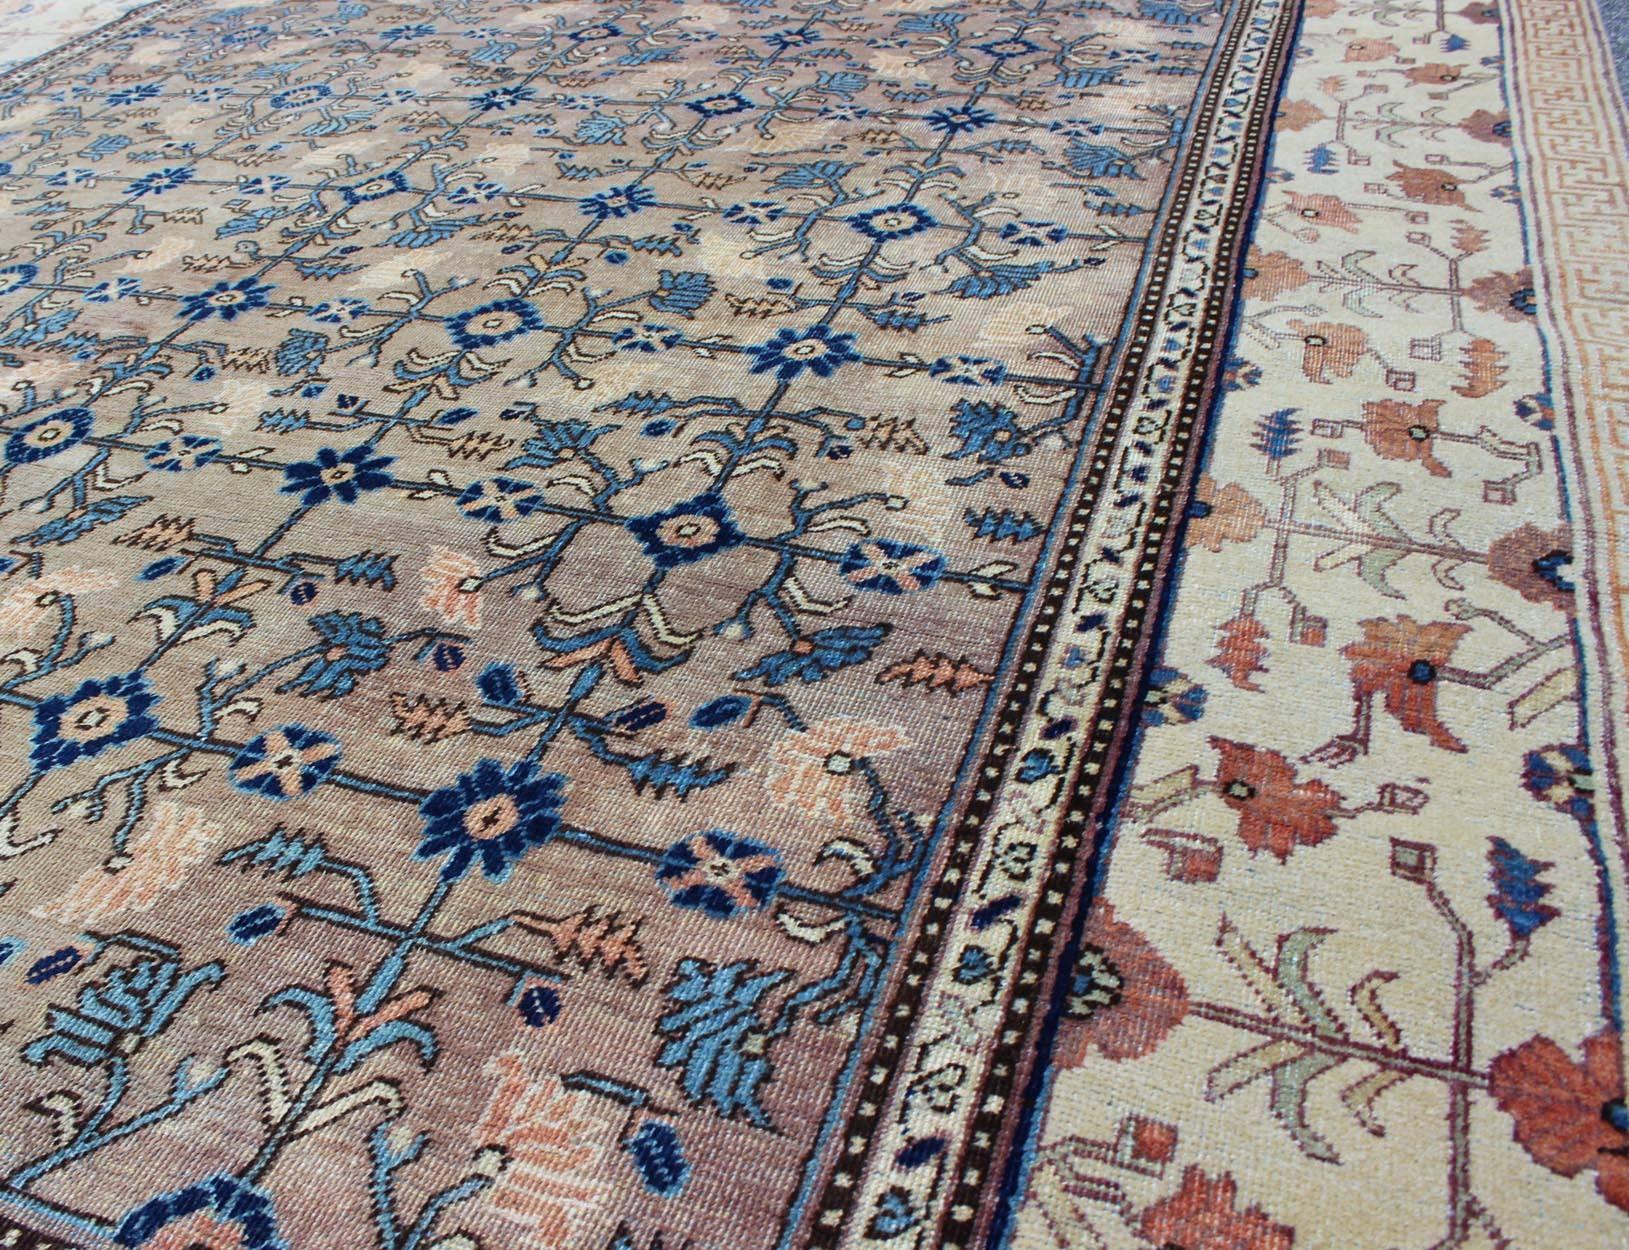 Early 20th Century Antique Khotan Rug with All-Over Floral Blossom Design in Gray, Ivory and Blue